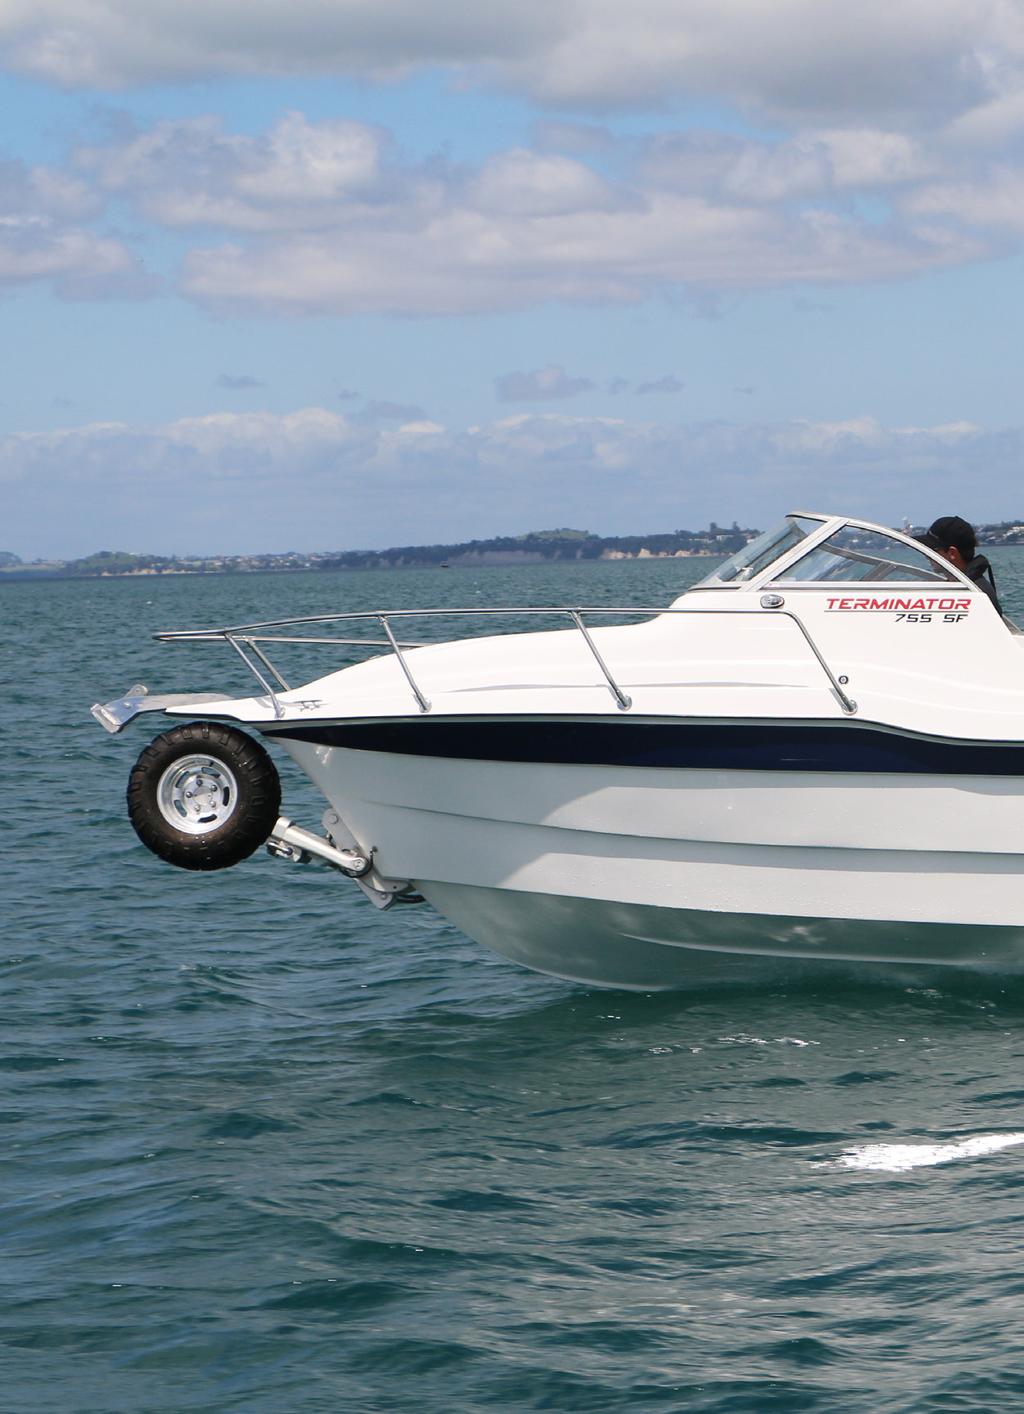 BOAT REVIEW Terminator 755 SF Judgement Day A Yamaha 150hp 4S will push